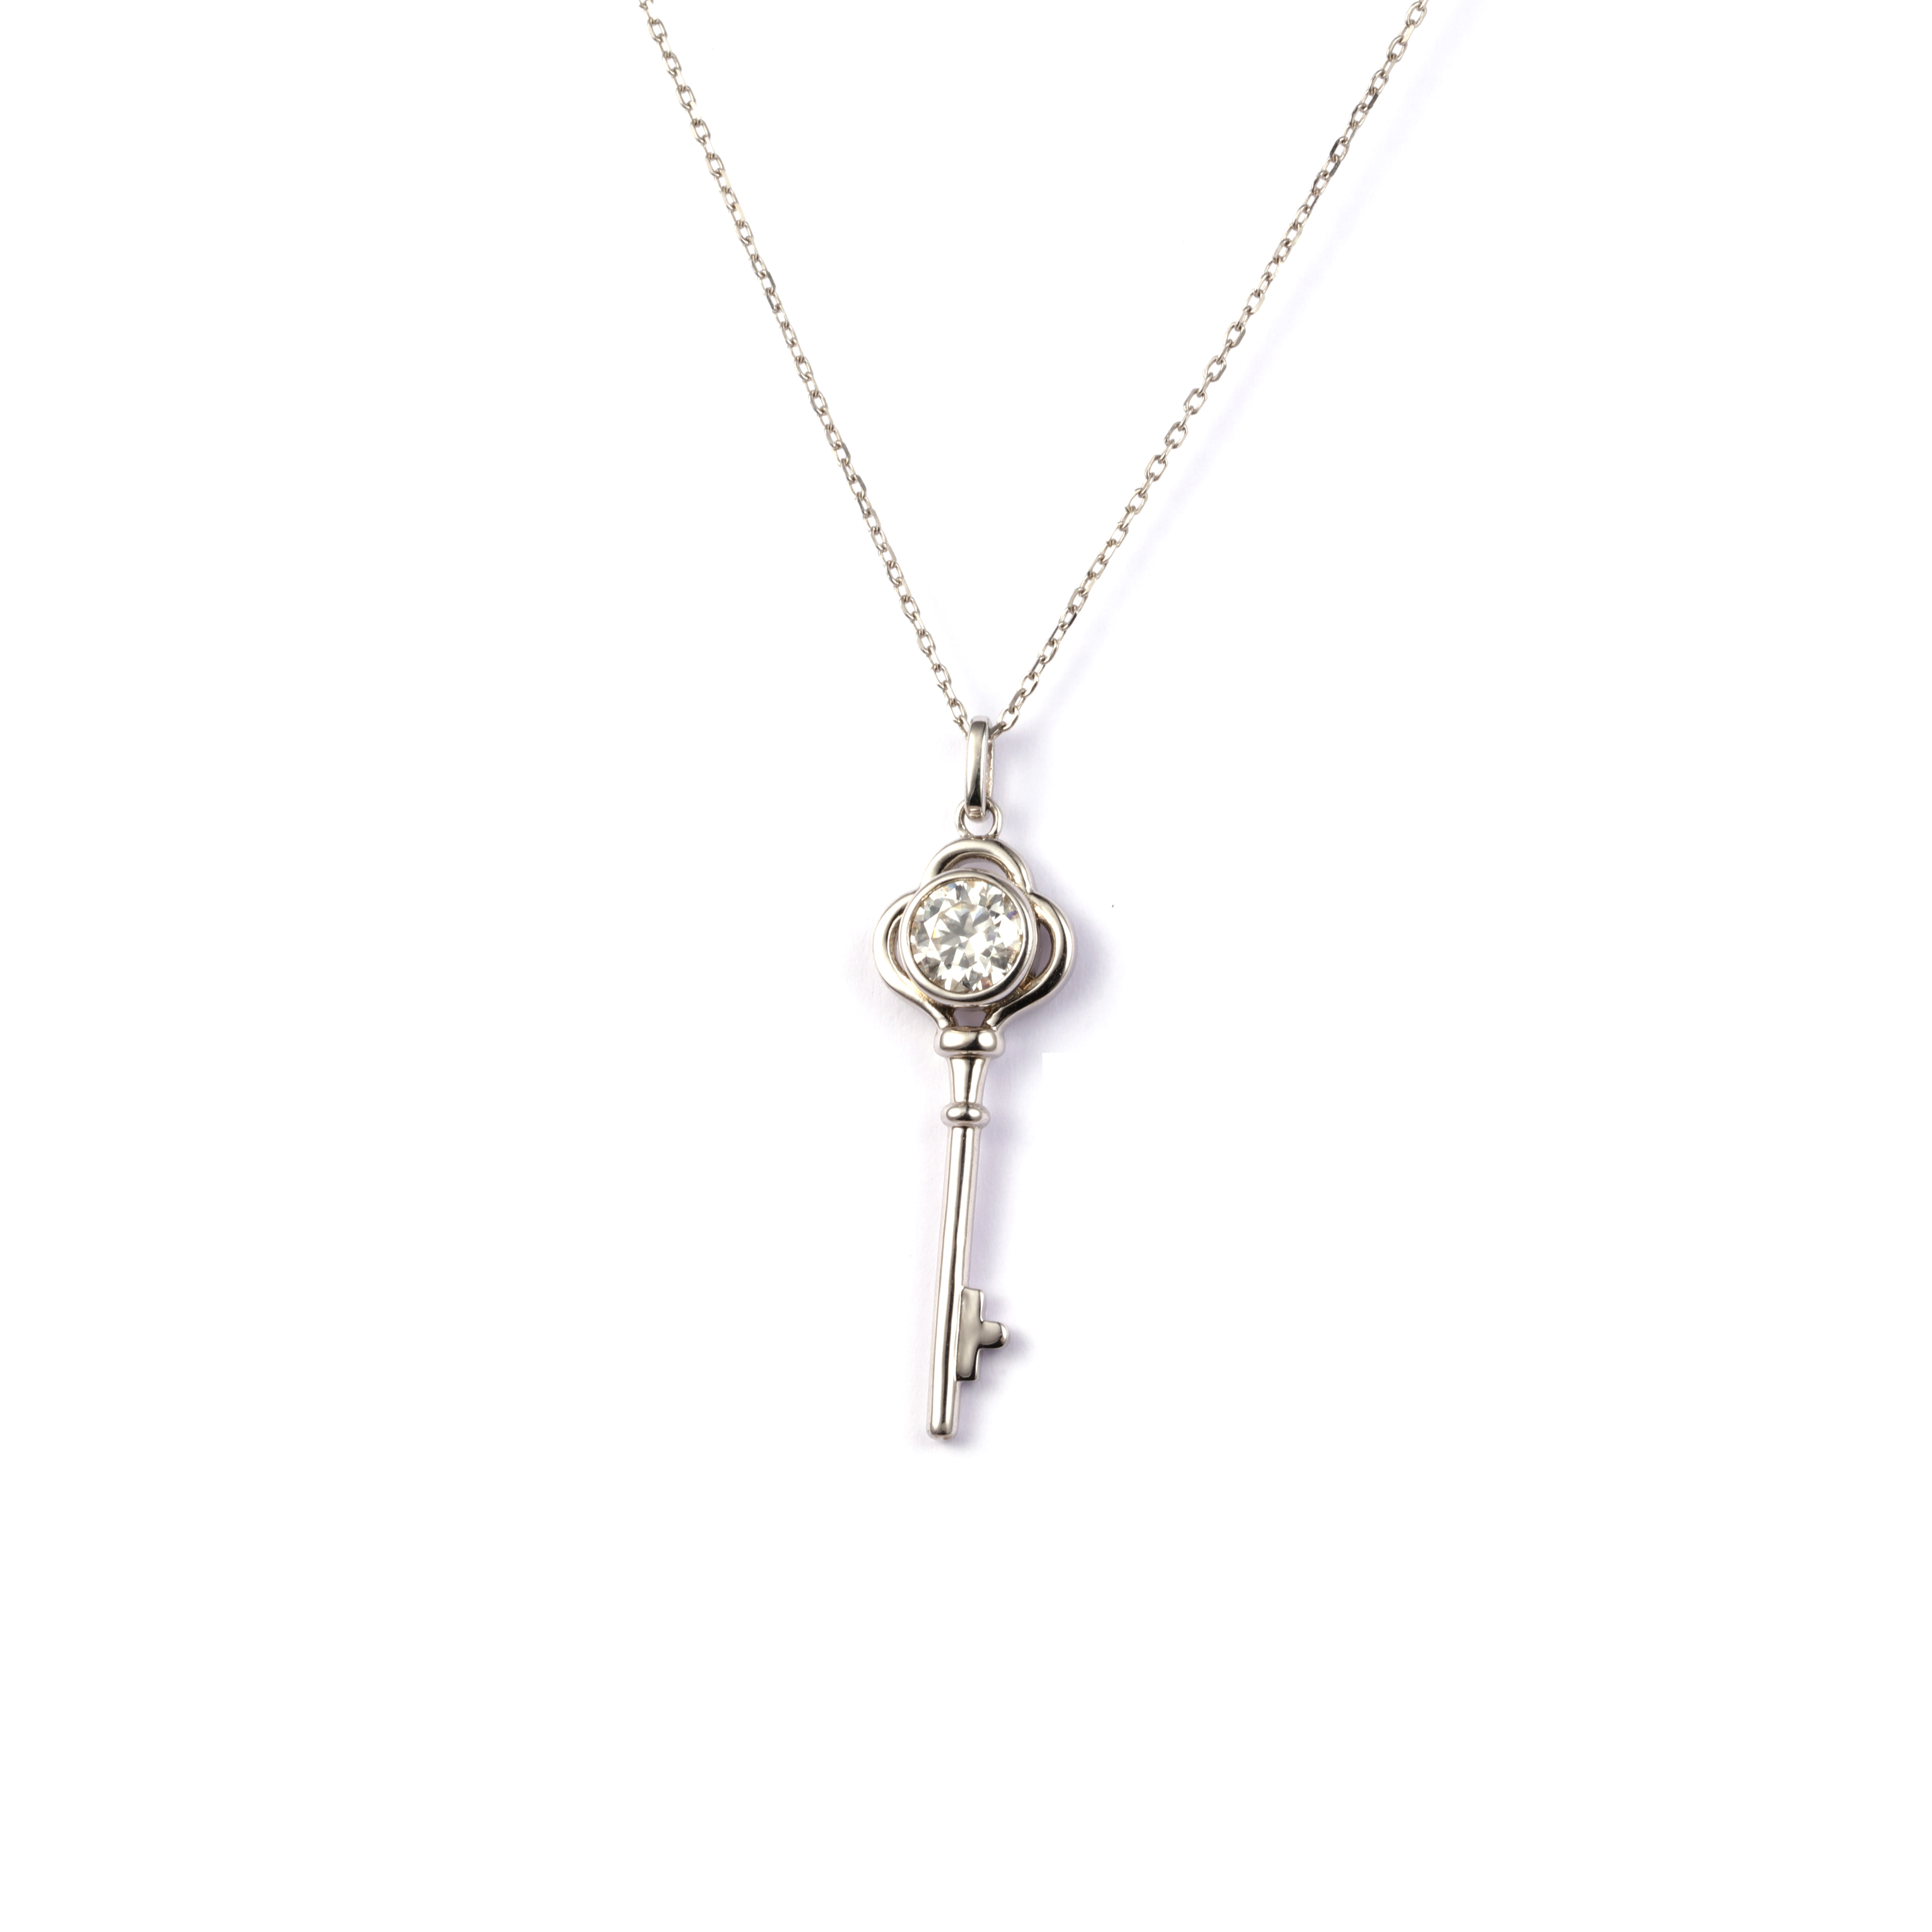 Rhodium Plated Key Pendant Silver Necklace 